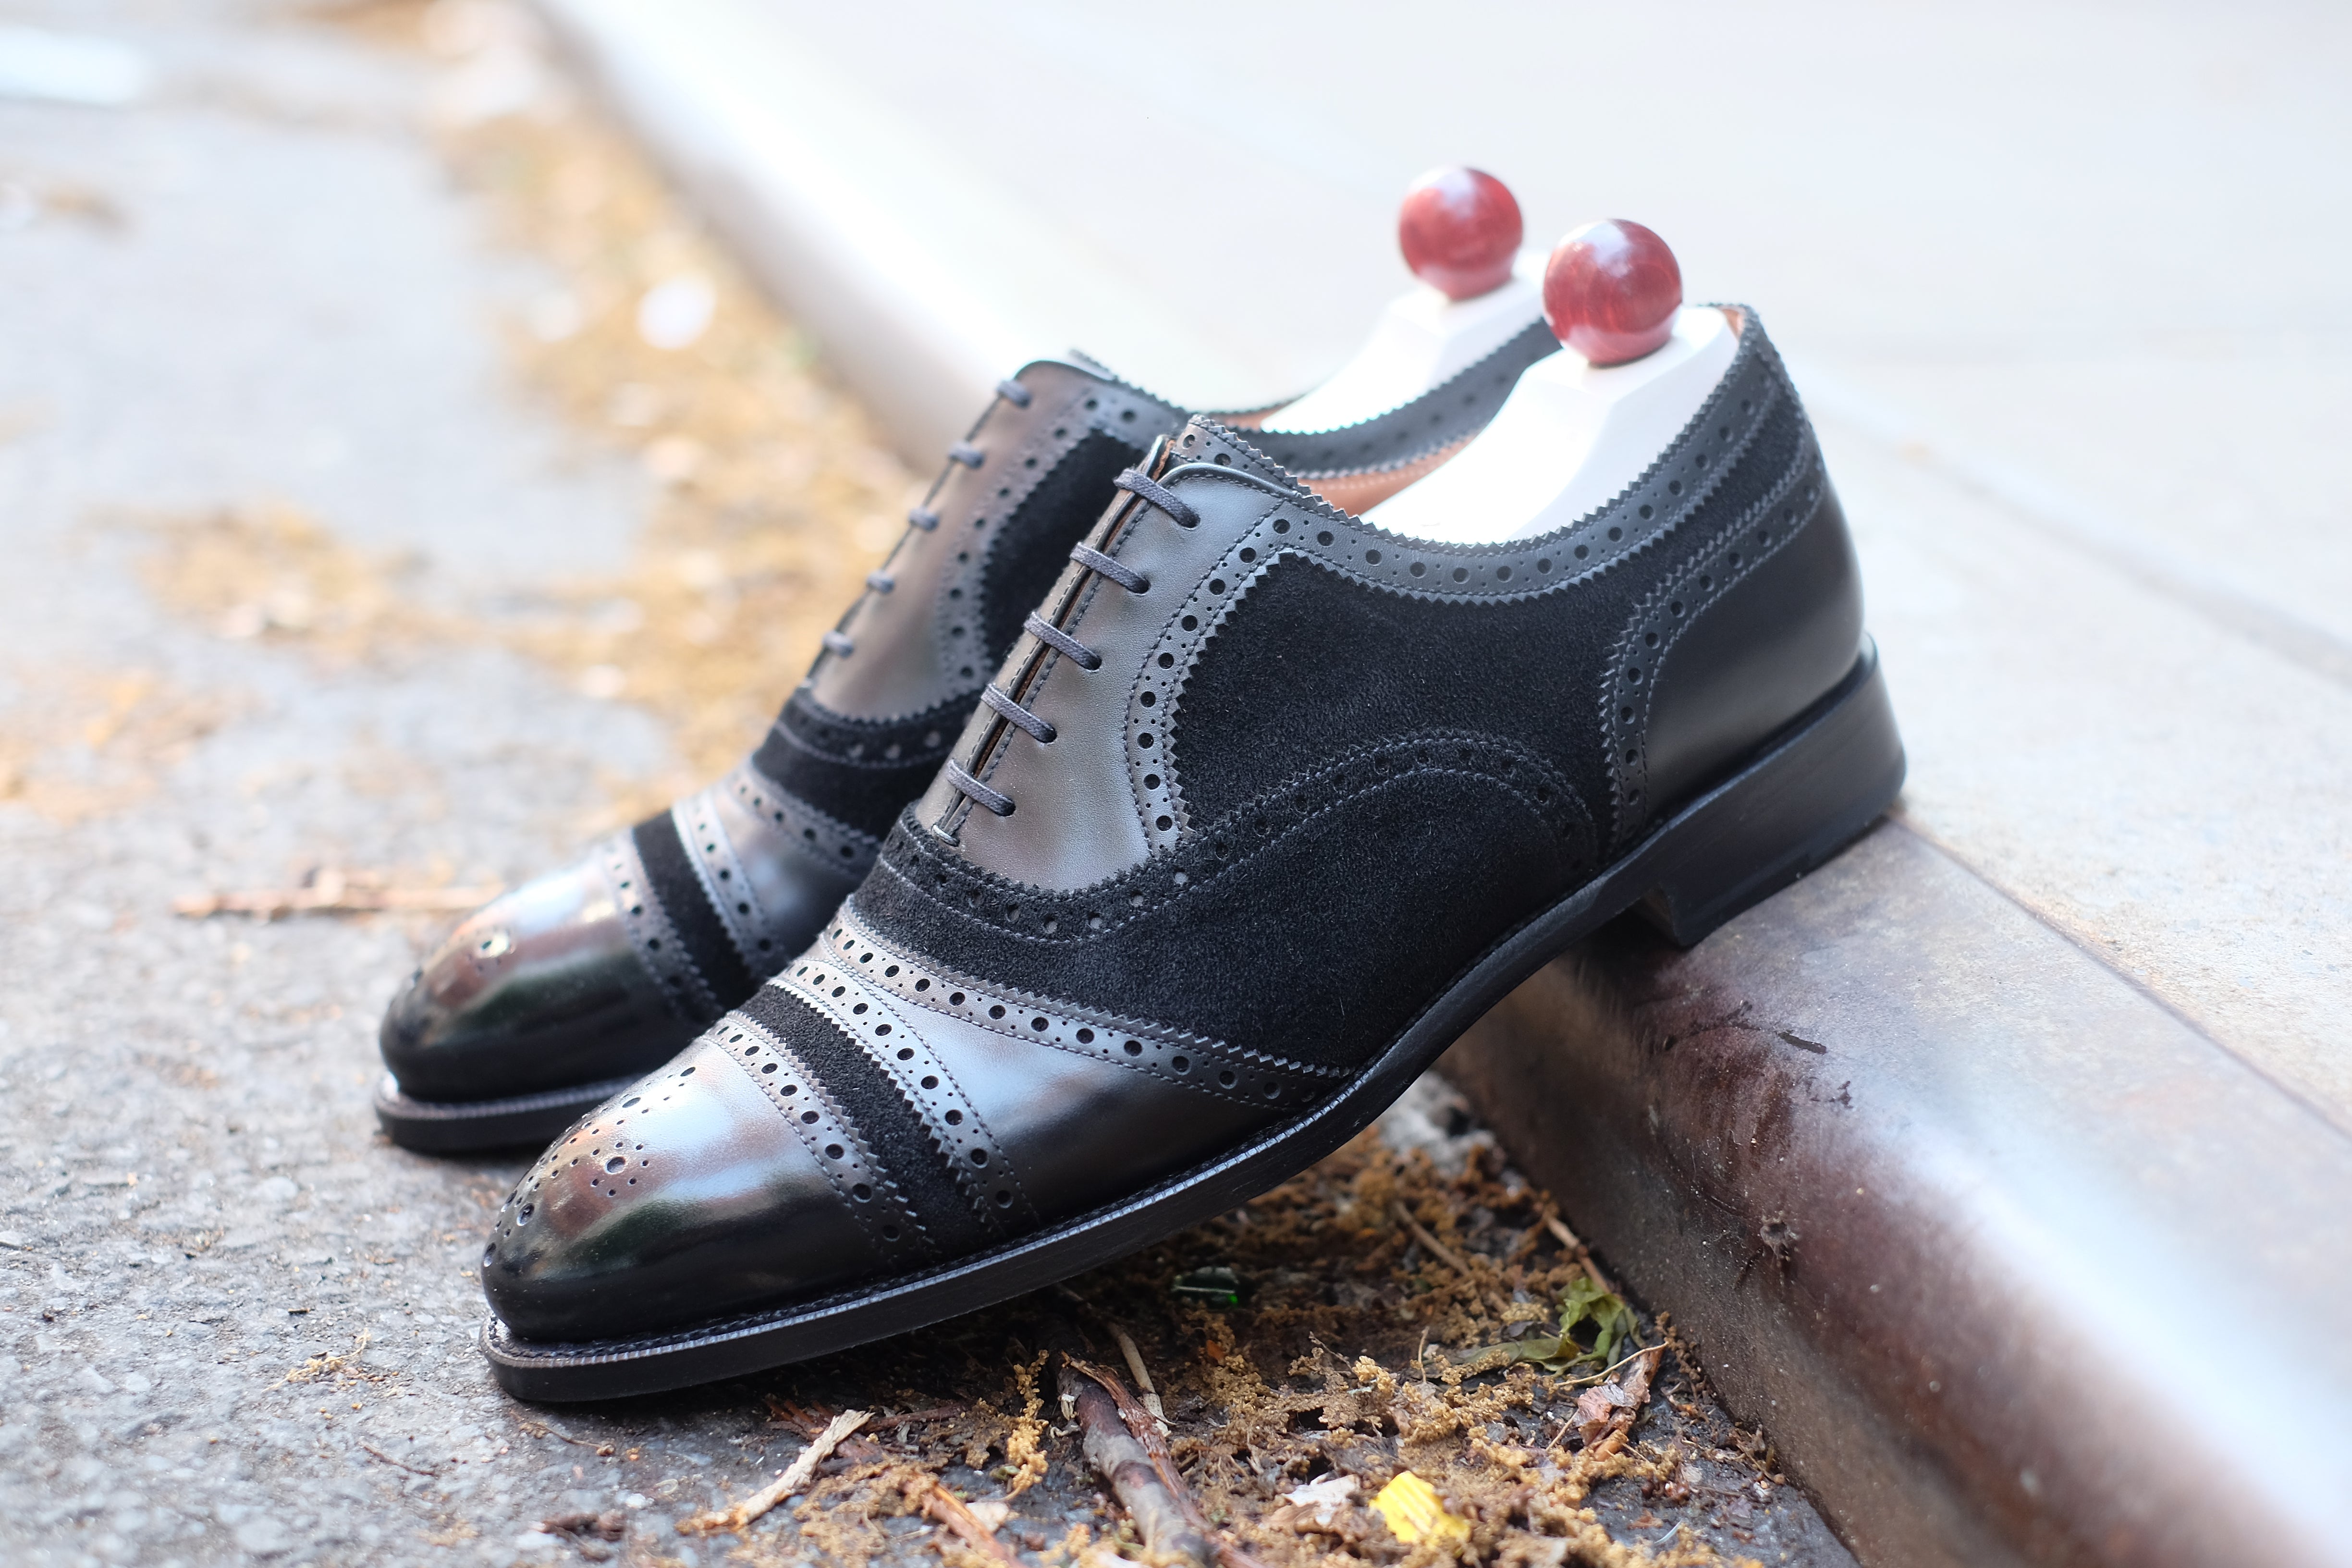 Phillips MTO - Black Calf / Black Suede - NGT Last - Single Leather Sole